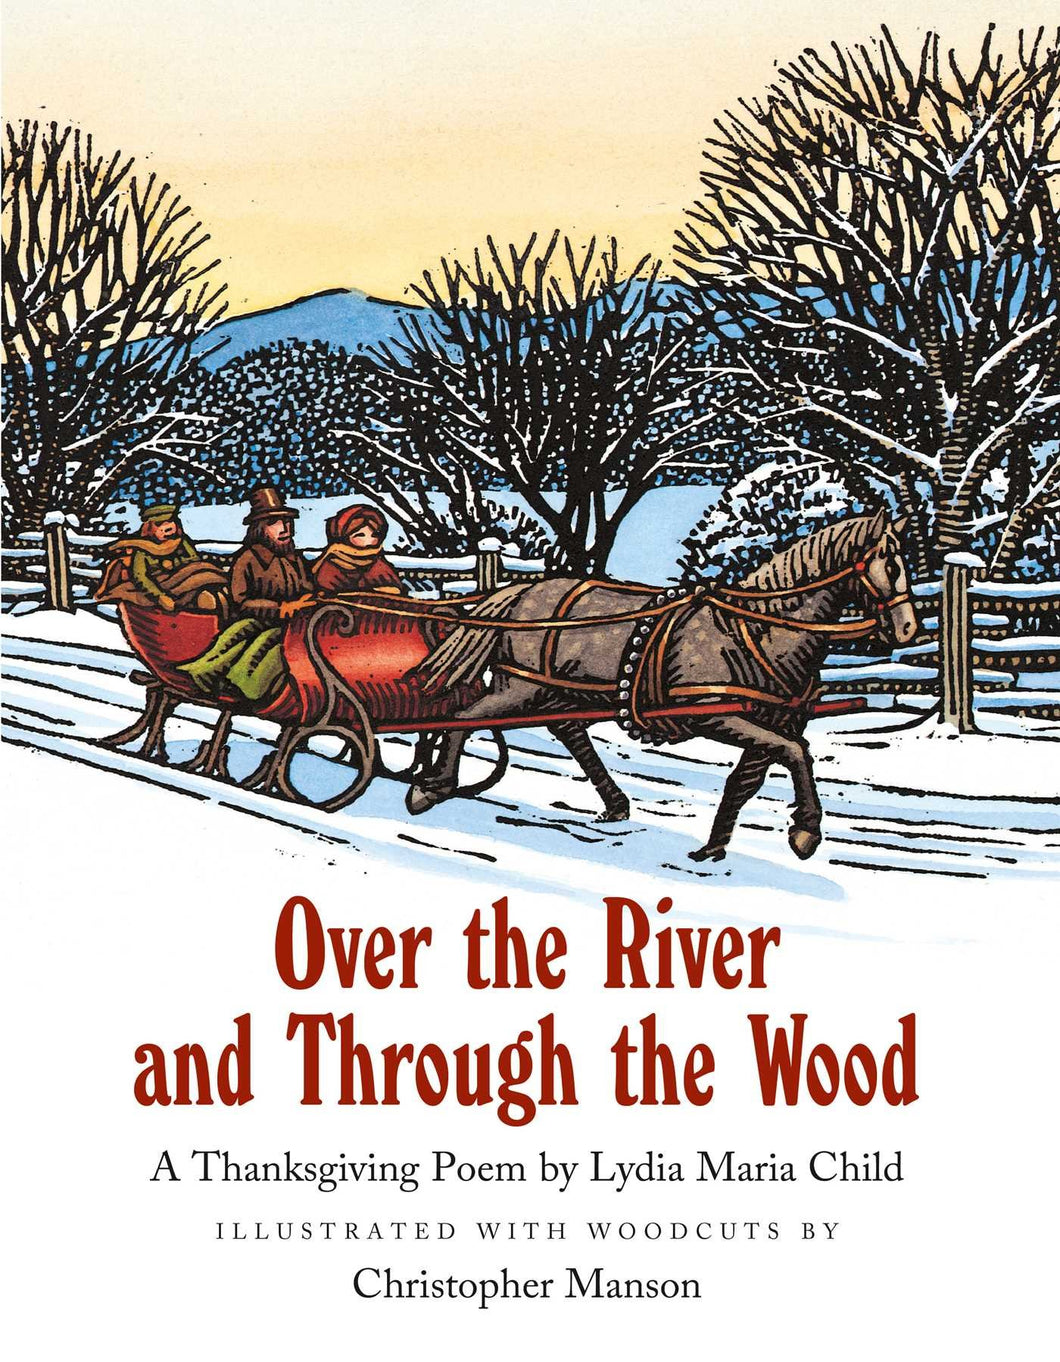 Over the River and Through the Woods  -  A Thanksgiving Poem